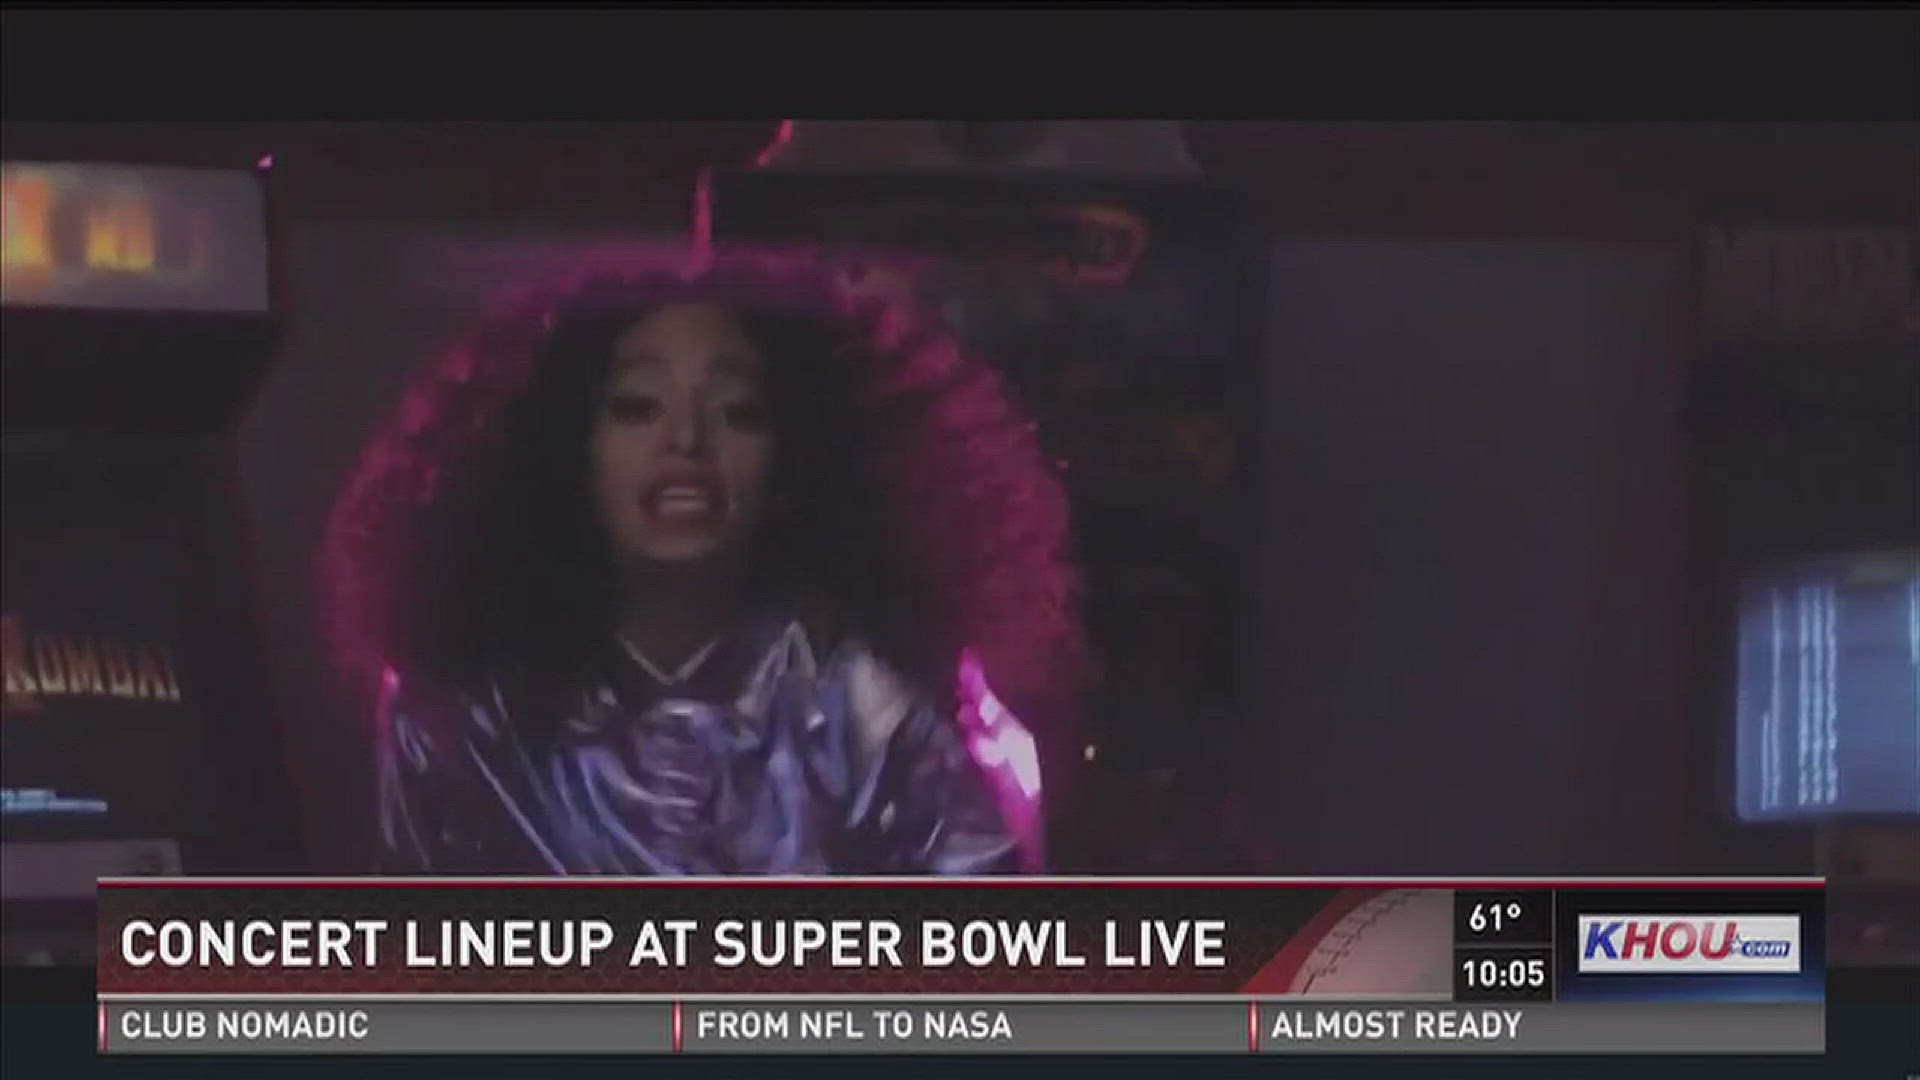 HOUSTON- Various performances are on the line up for Super Bowl LIVE this week.